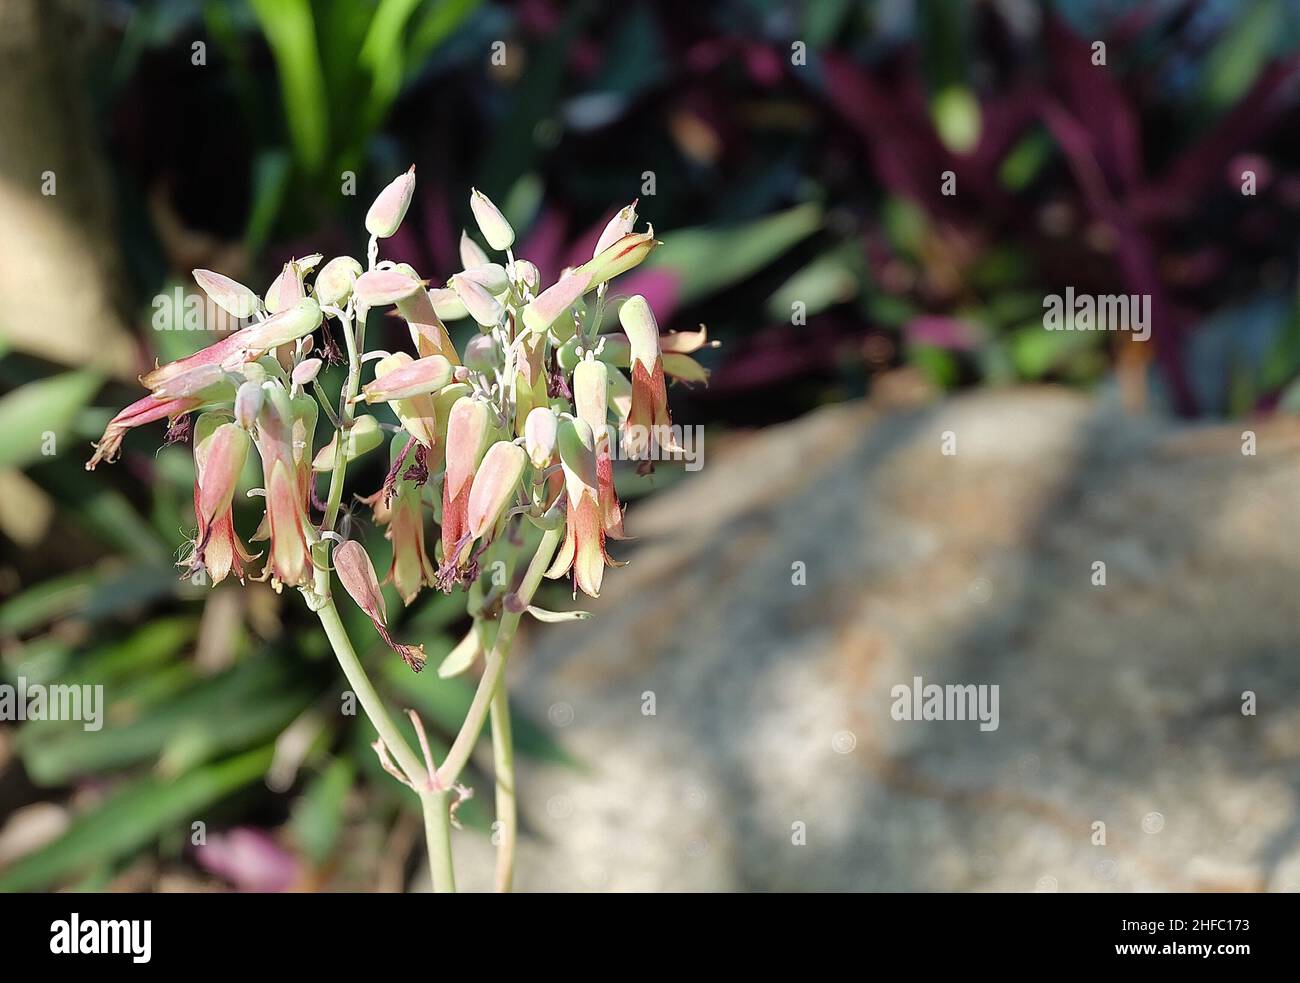 Kalanchoe Humilis or Desert Surprise Succulent Plant with Beautiful Flowers Blooming in A Garden. Stock Photo